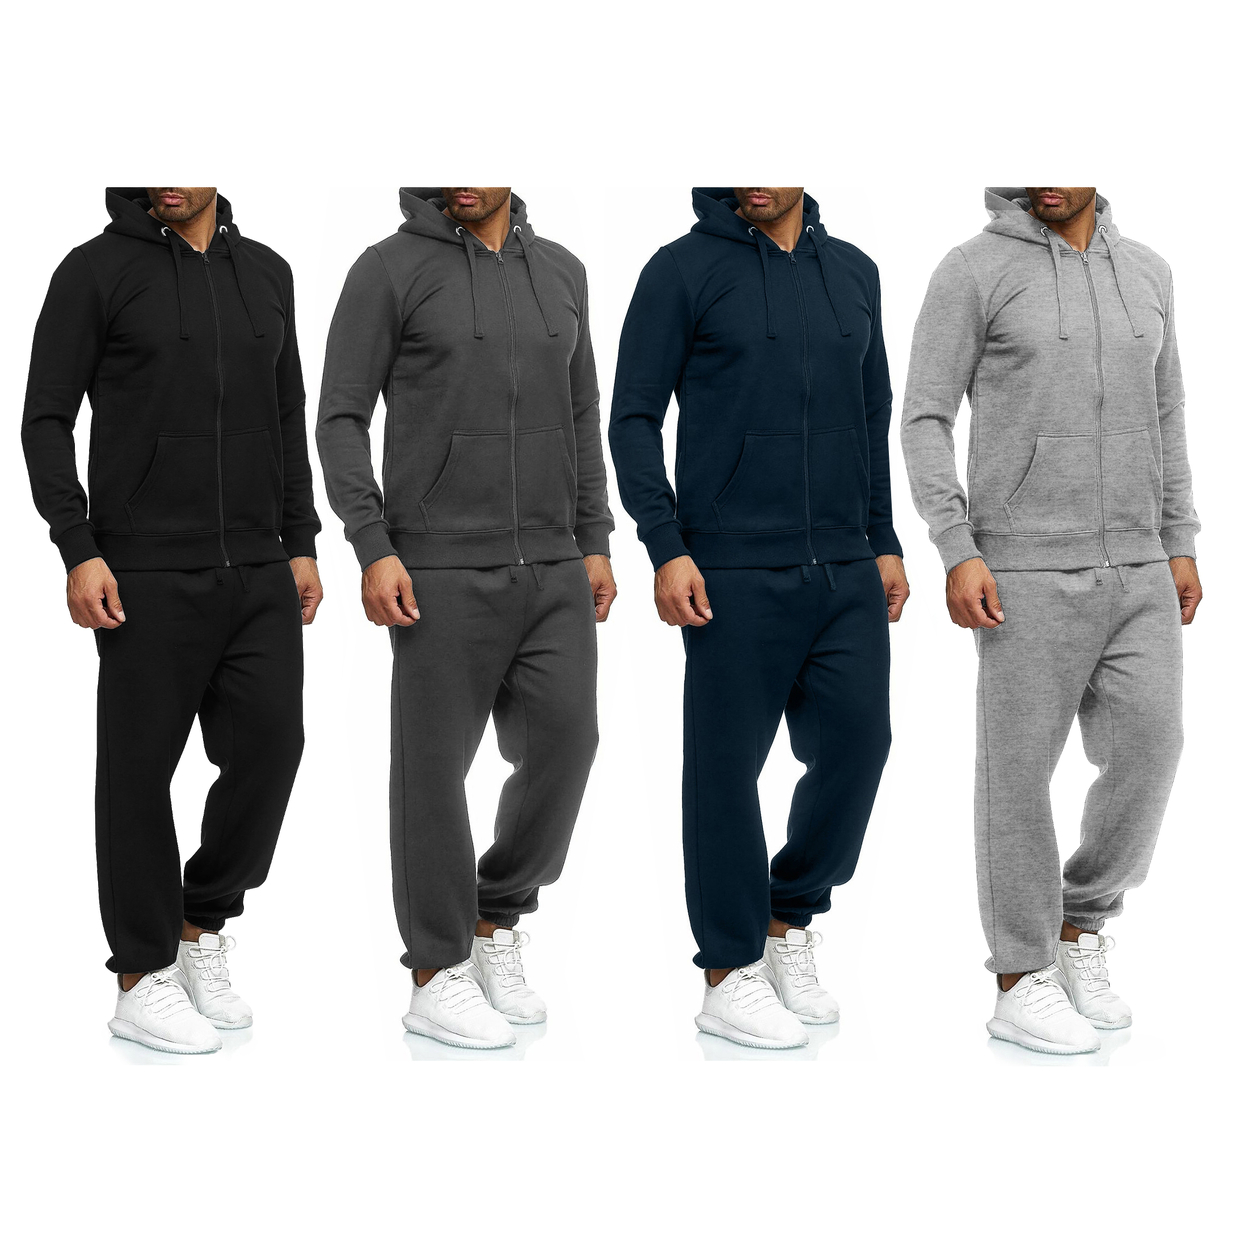 Multi-Pack: Men's Casual Big & Tall Athletic Active Winter Warm Fleece Lined Full Zip Tracksuit Jogger Set - Navy, 2-pack, Medium